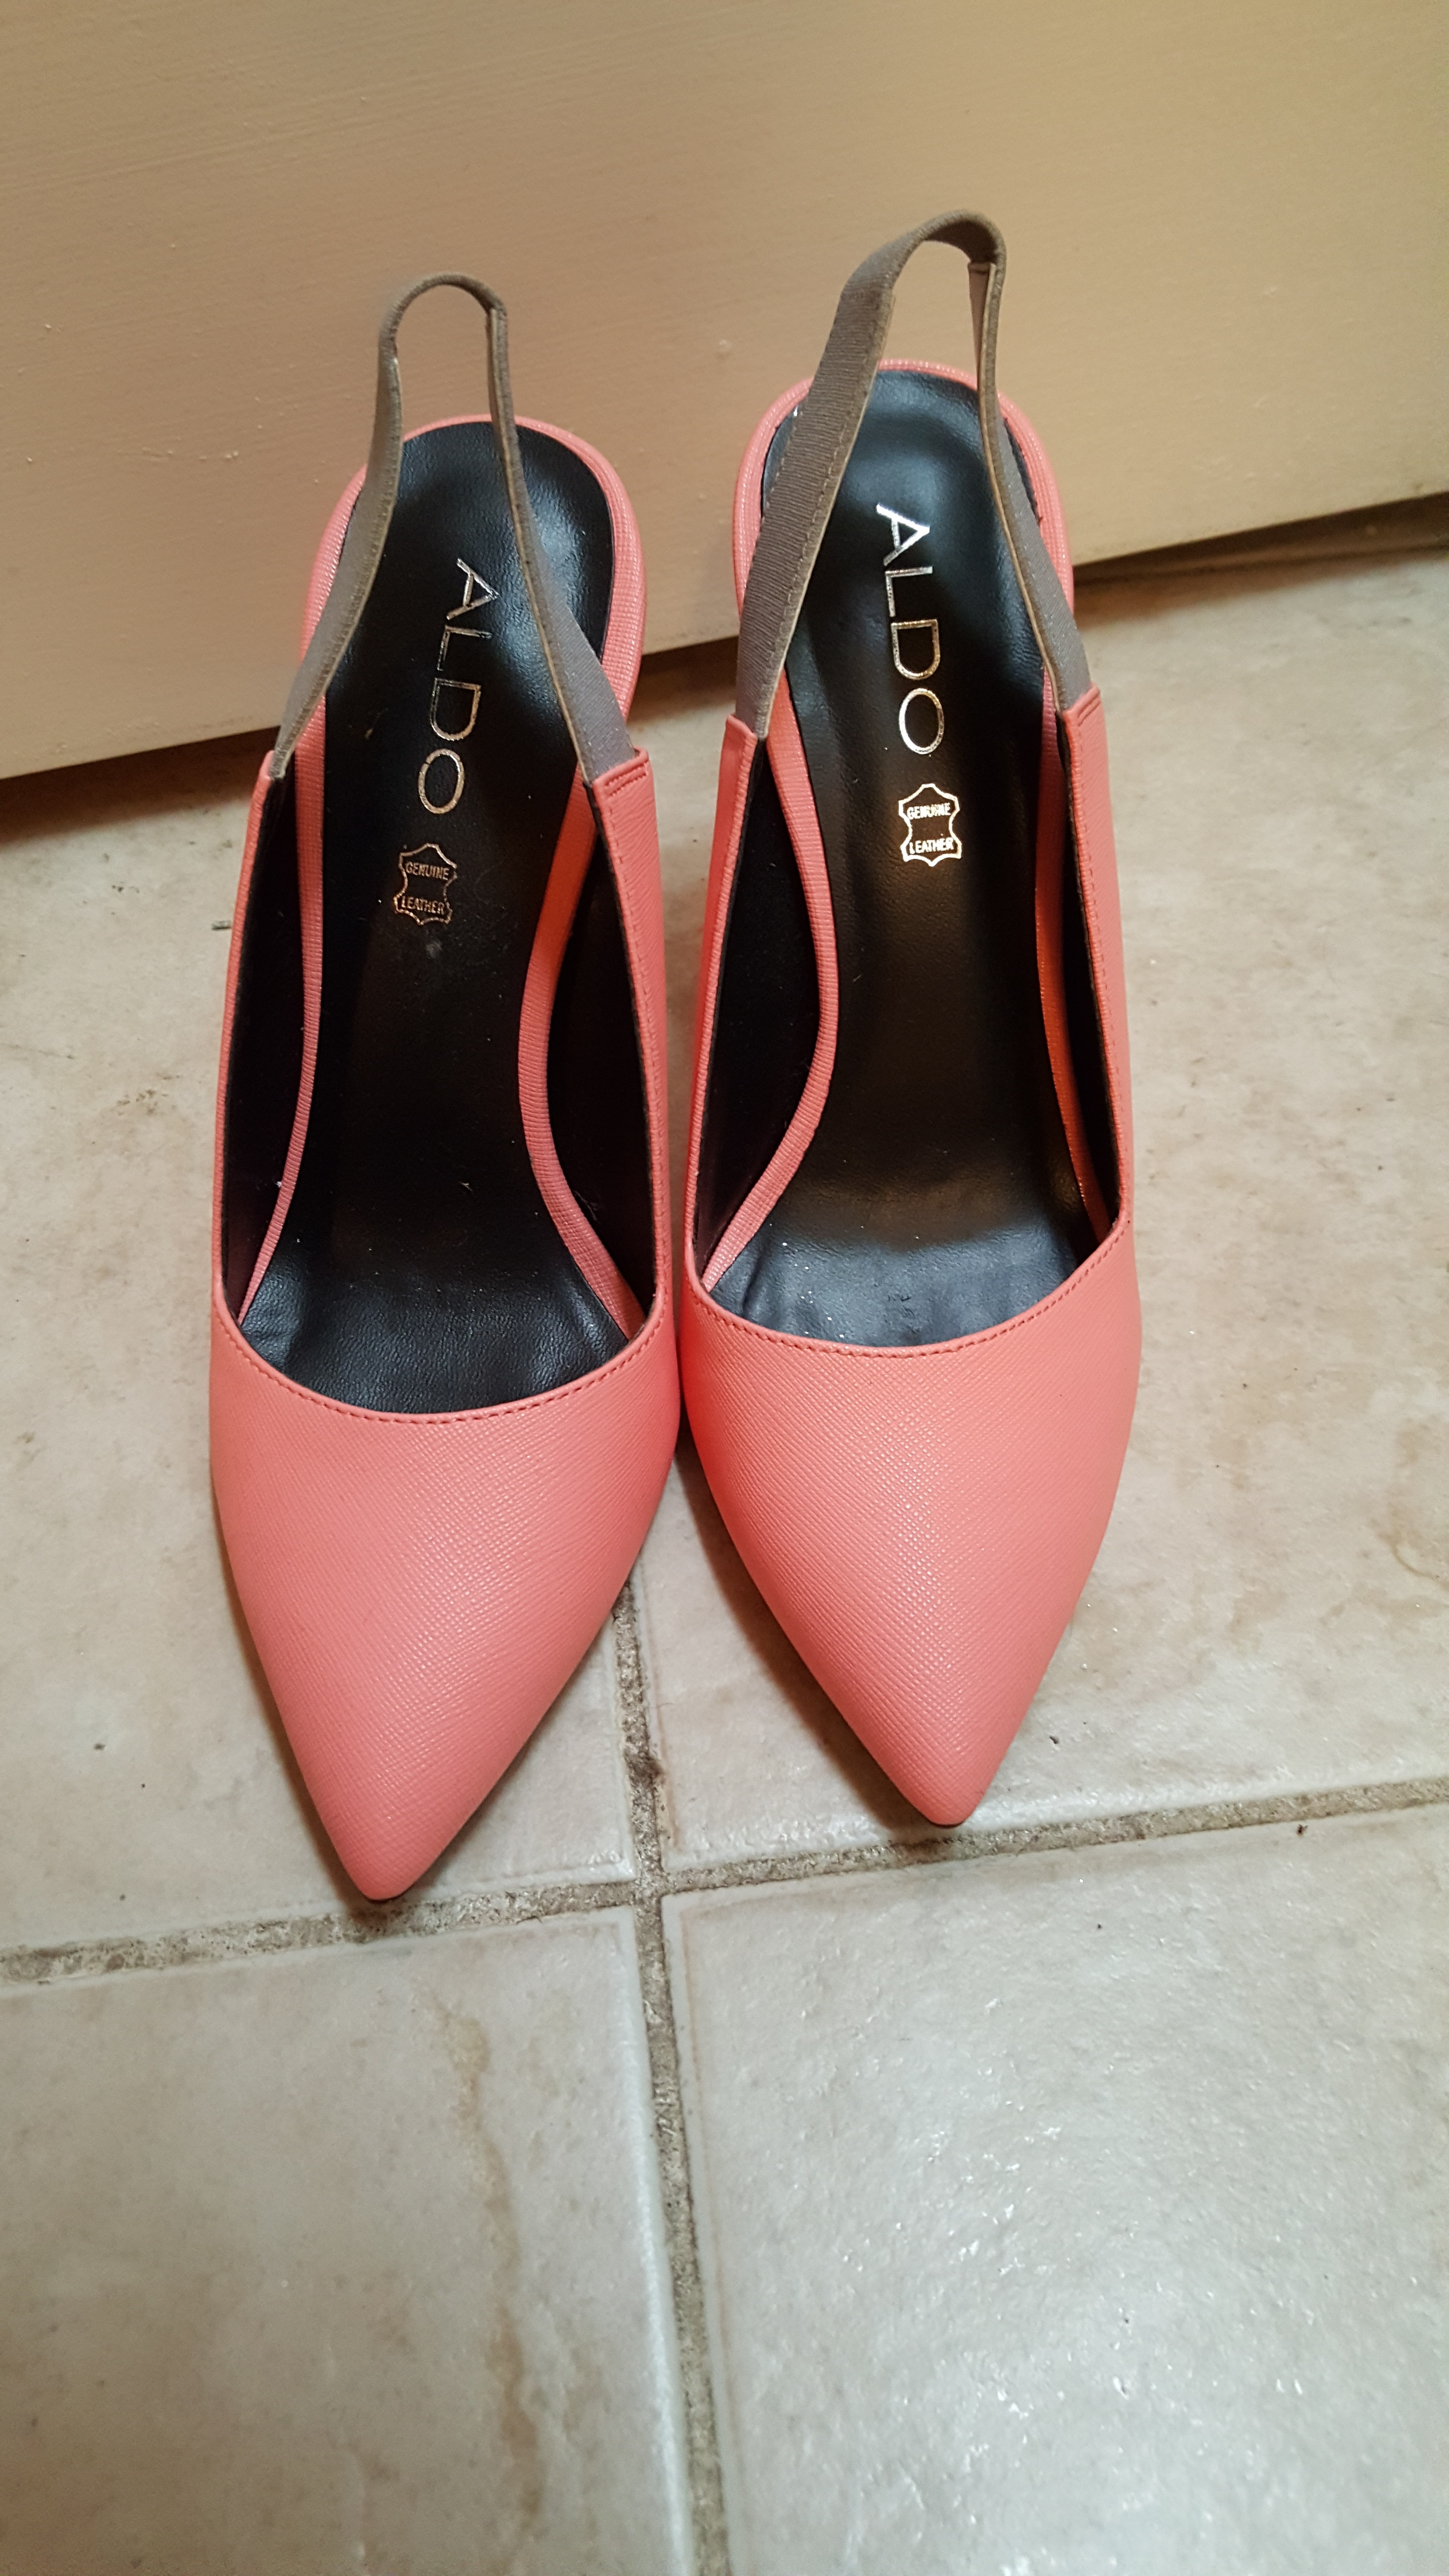 Aldo salmon pink heels Available for 